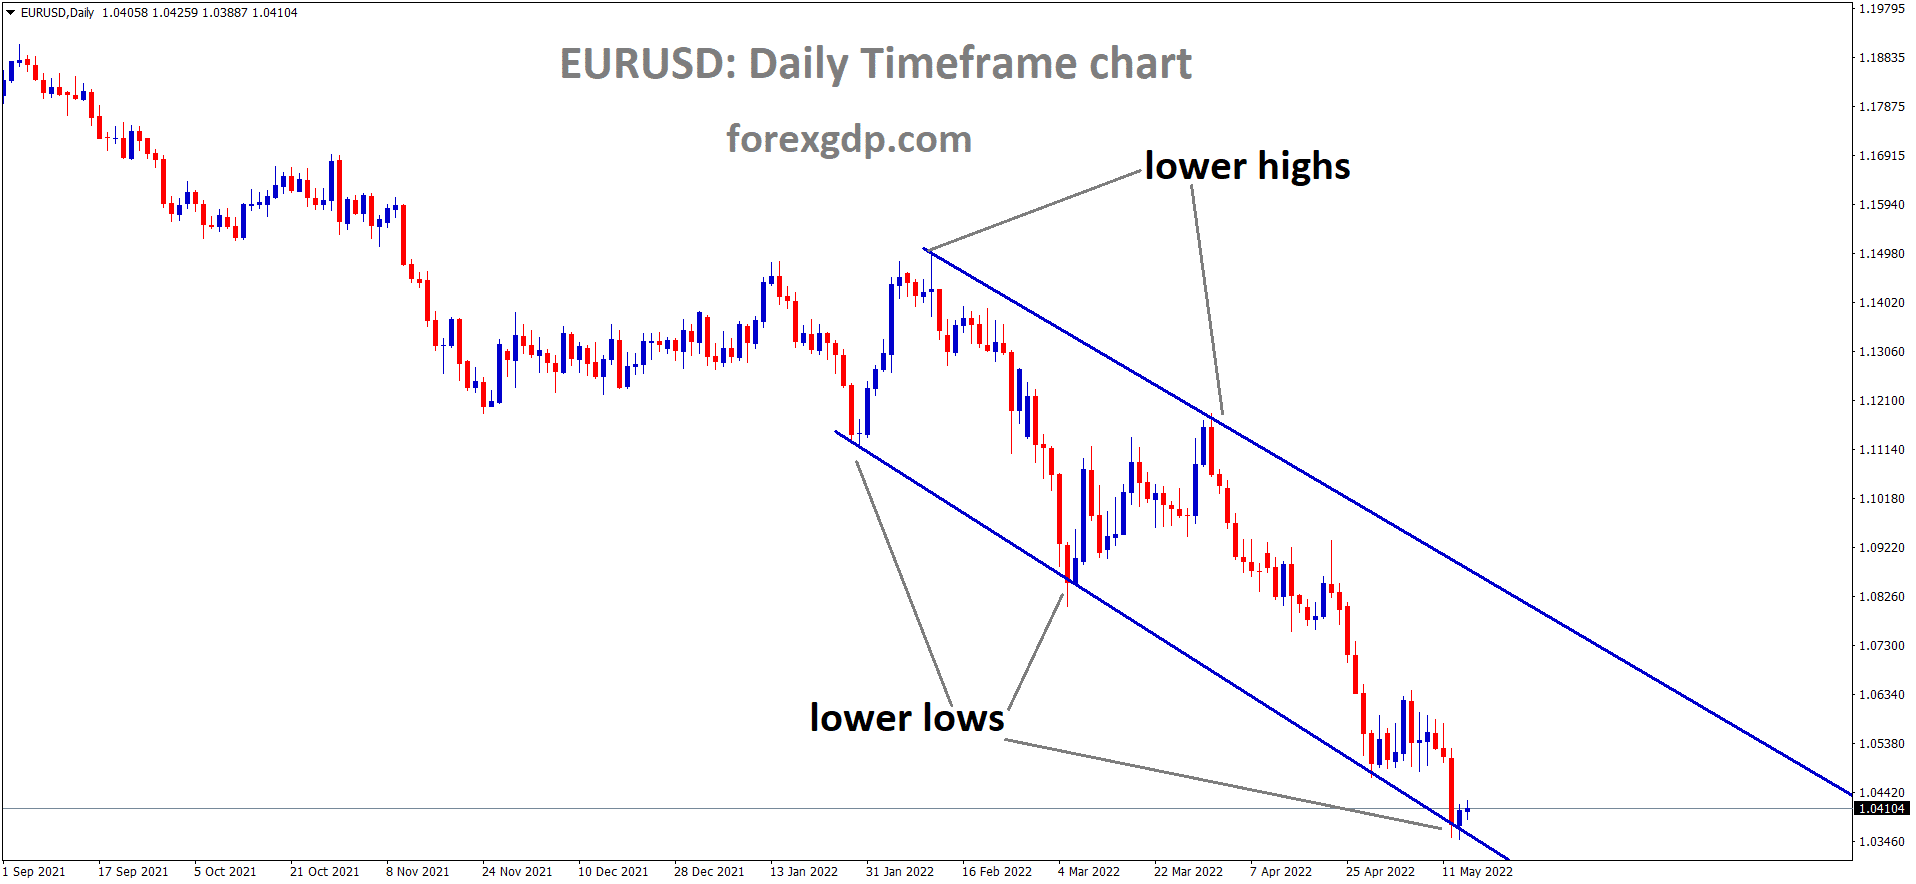 EURUSD Daily moving in descending channel and the market has reached the lower low area of the channel.